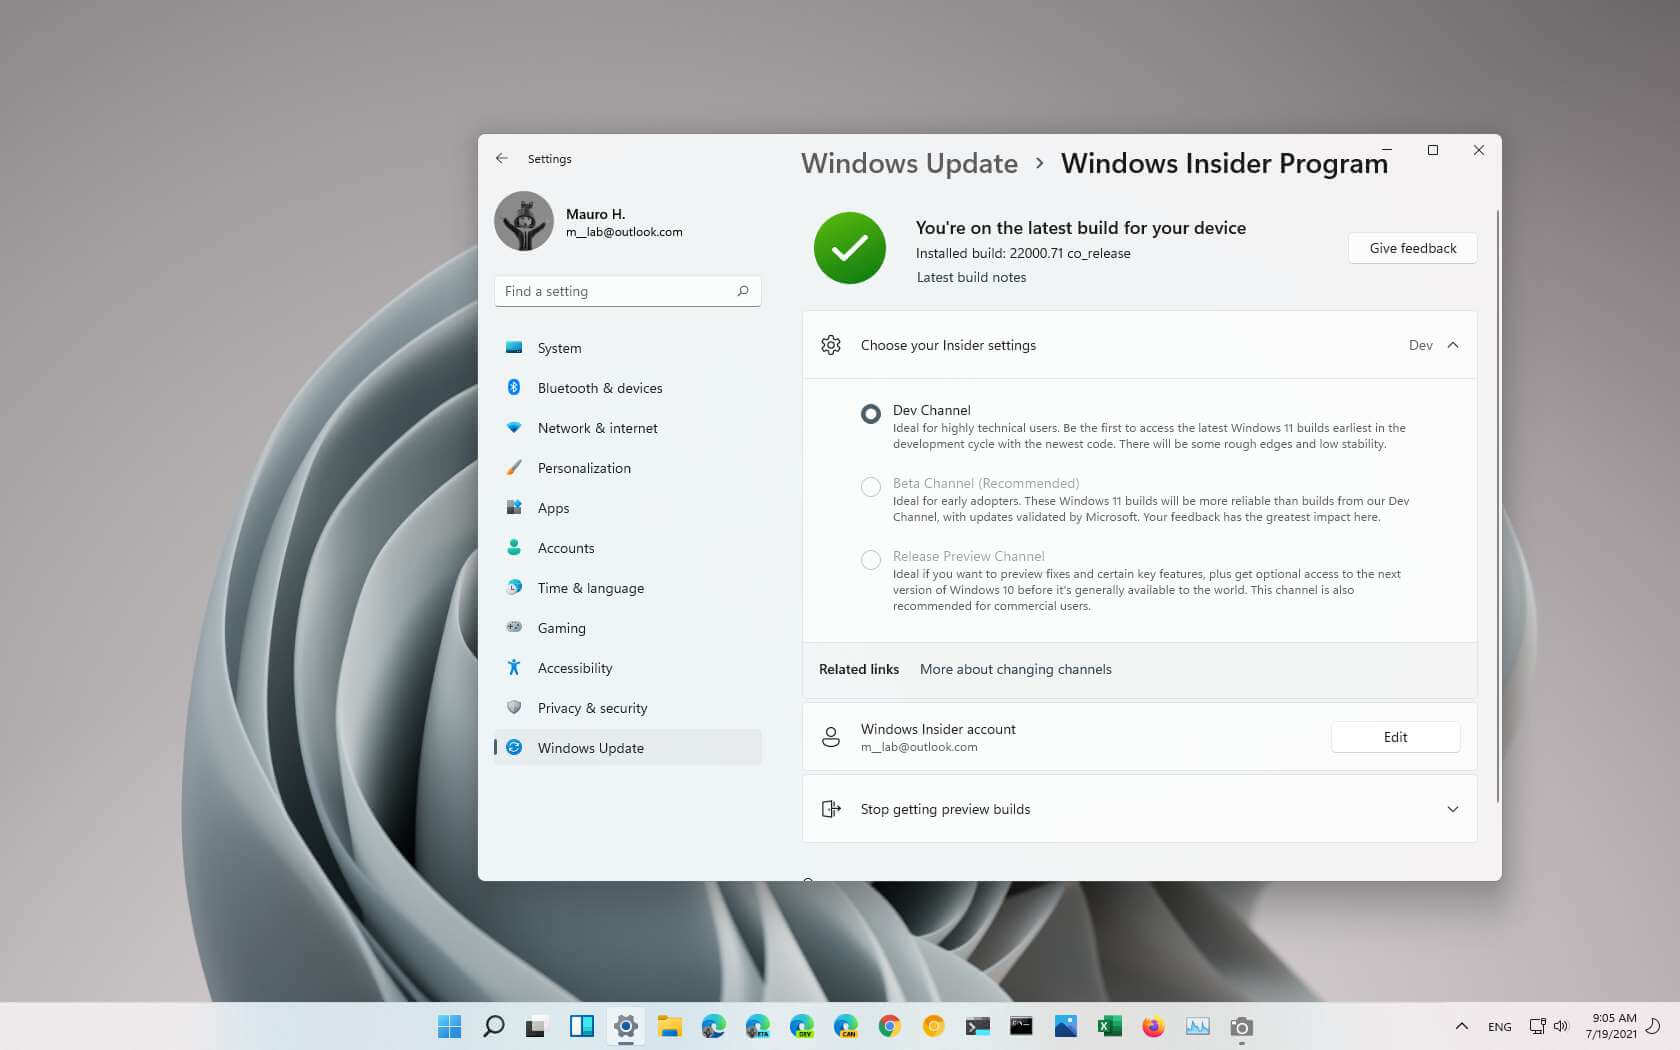 windows 11 insider preview download